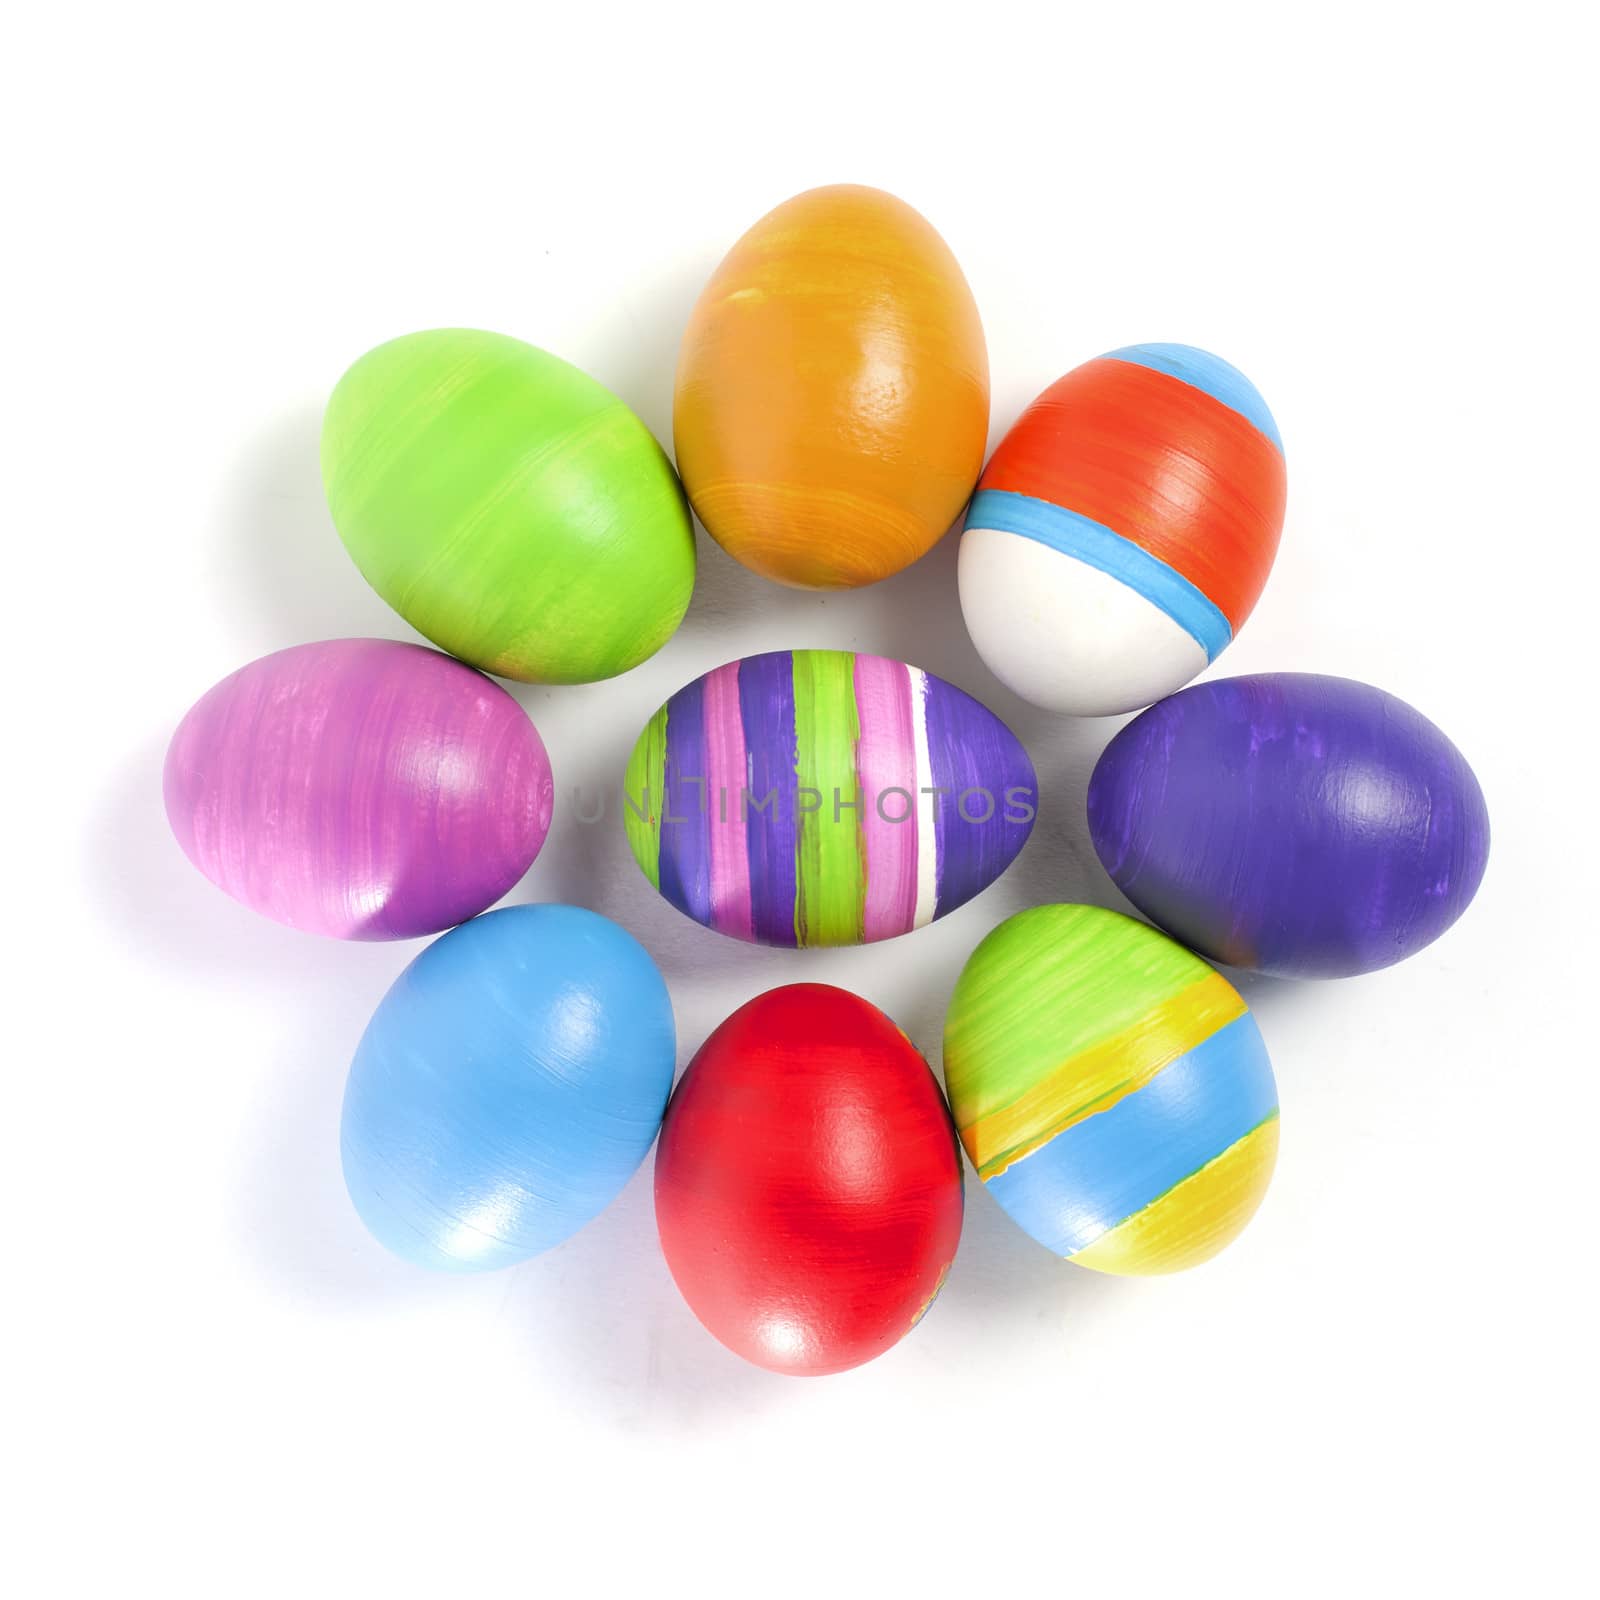 Hand-painted colorful easter eggs isolated on white